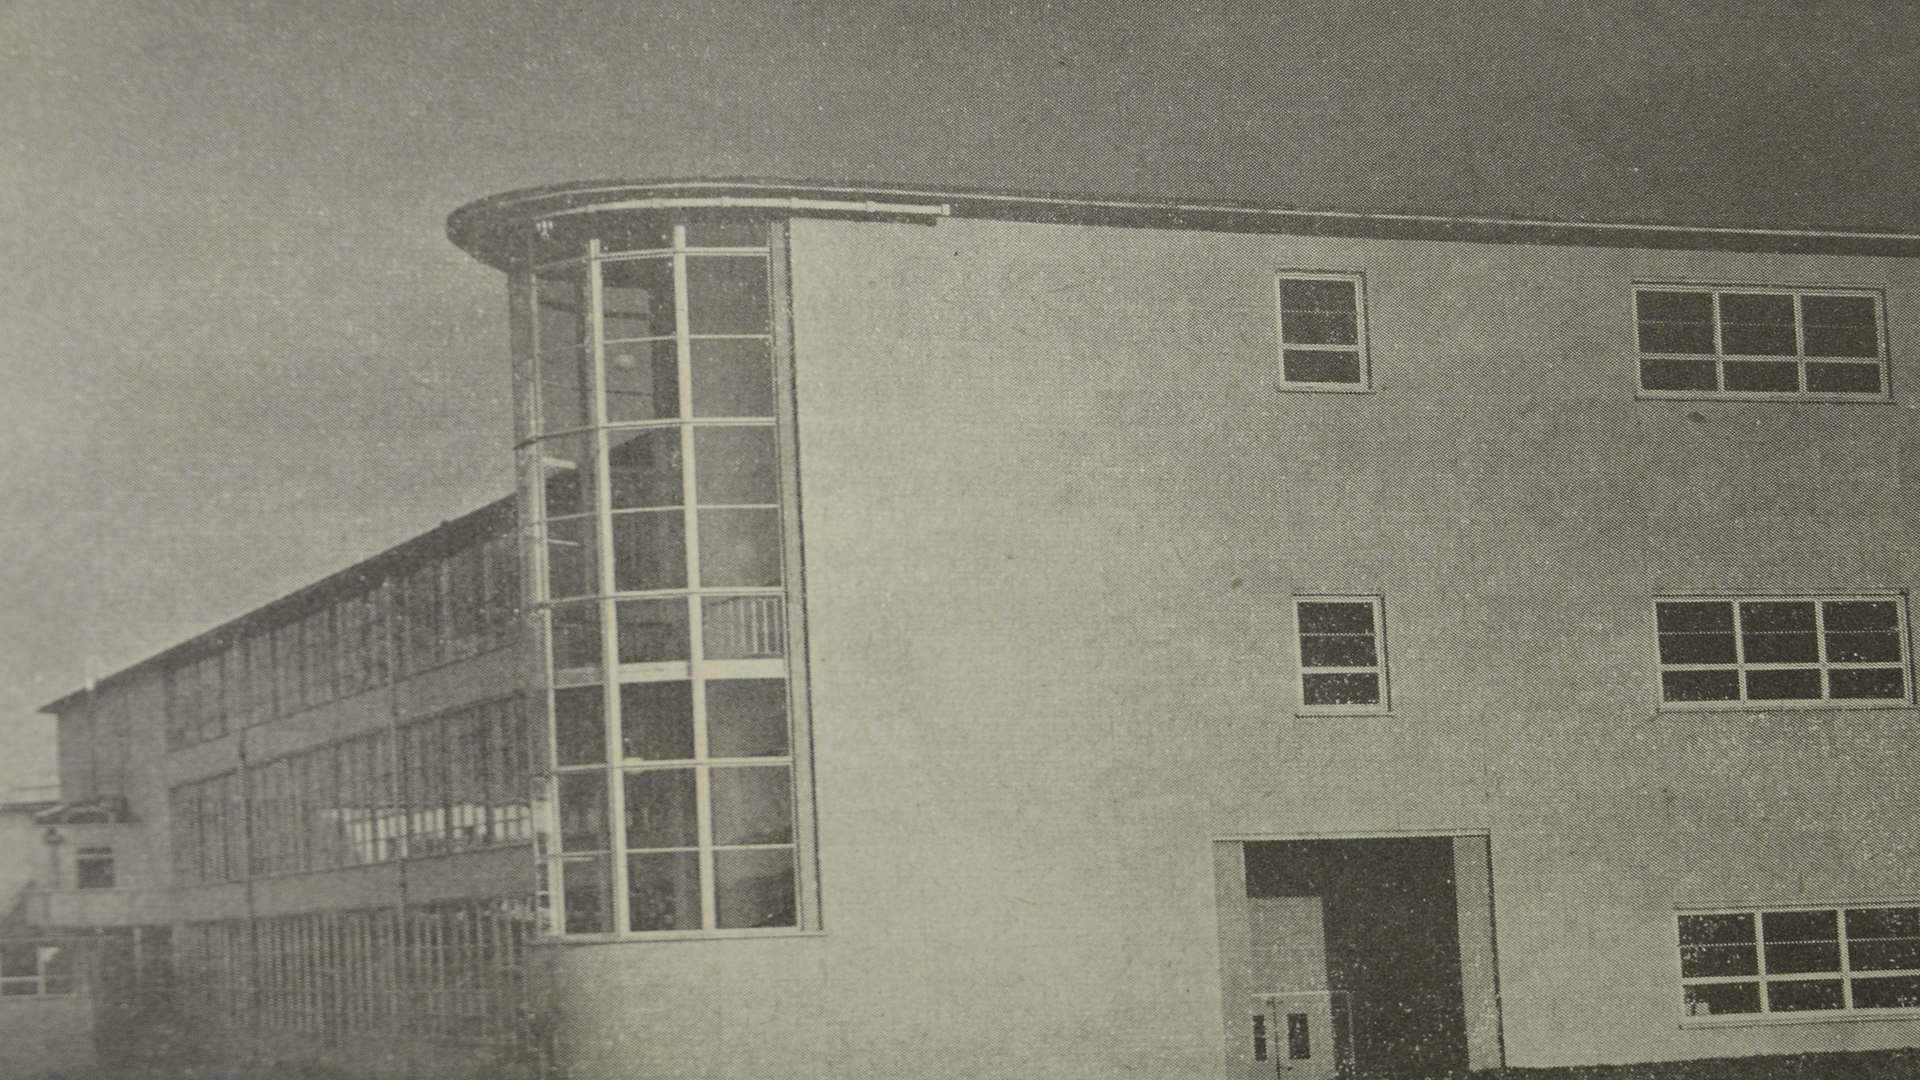 The building was nicknamed The Sunshine School when it was opened